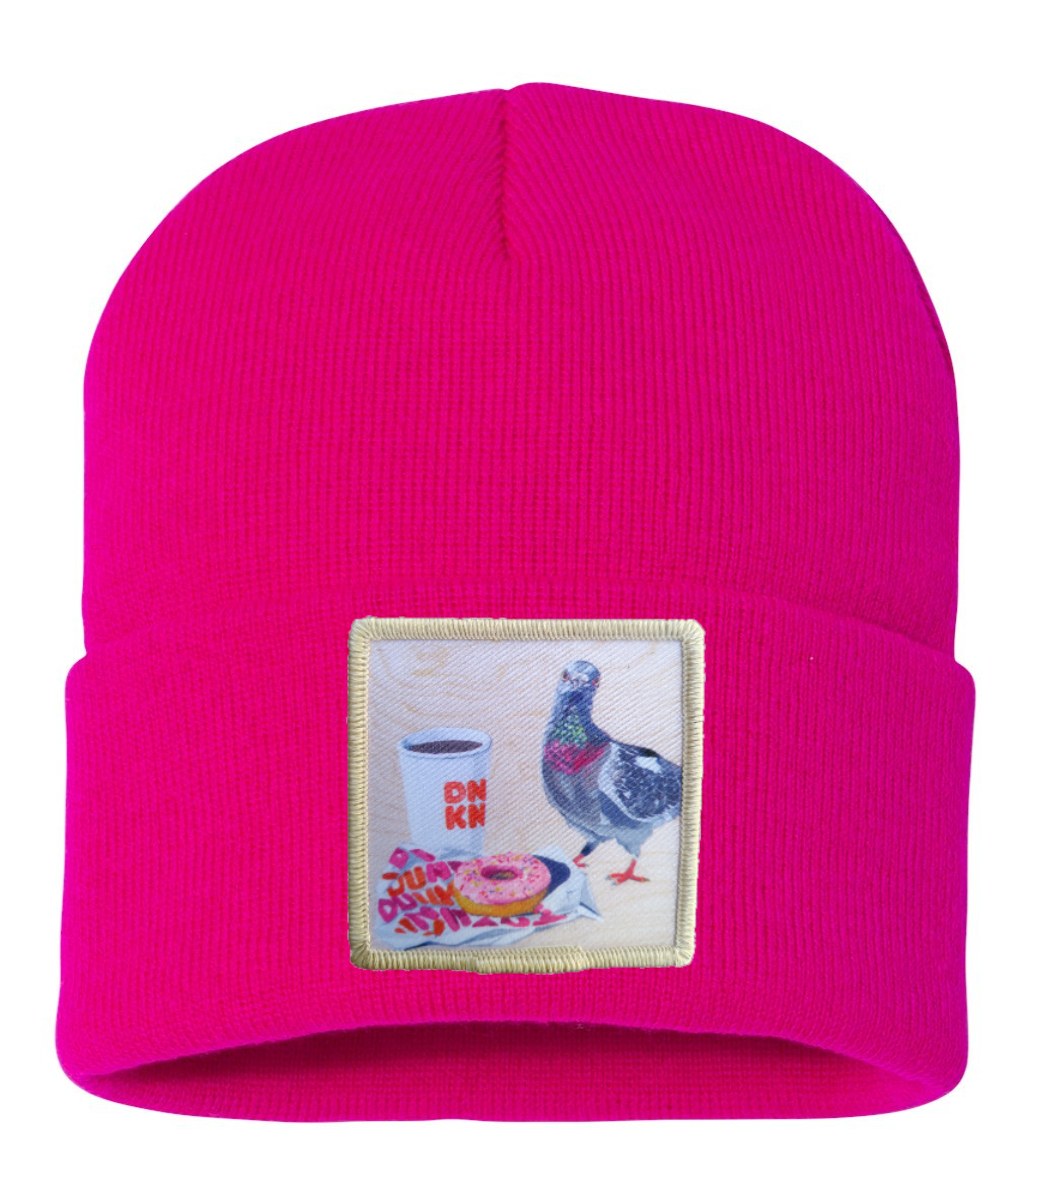 Pigeons Run on Donuts Beanie Hats Flyn Costello   